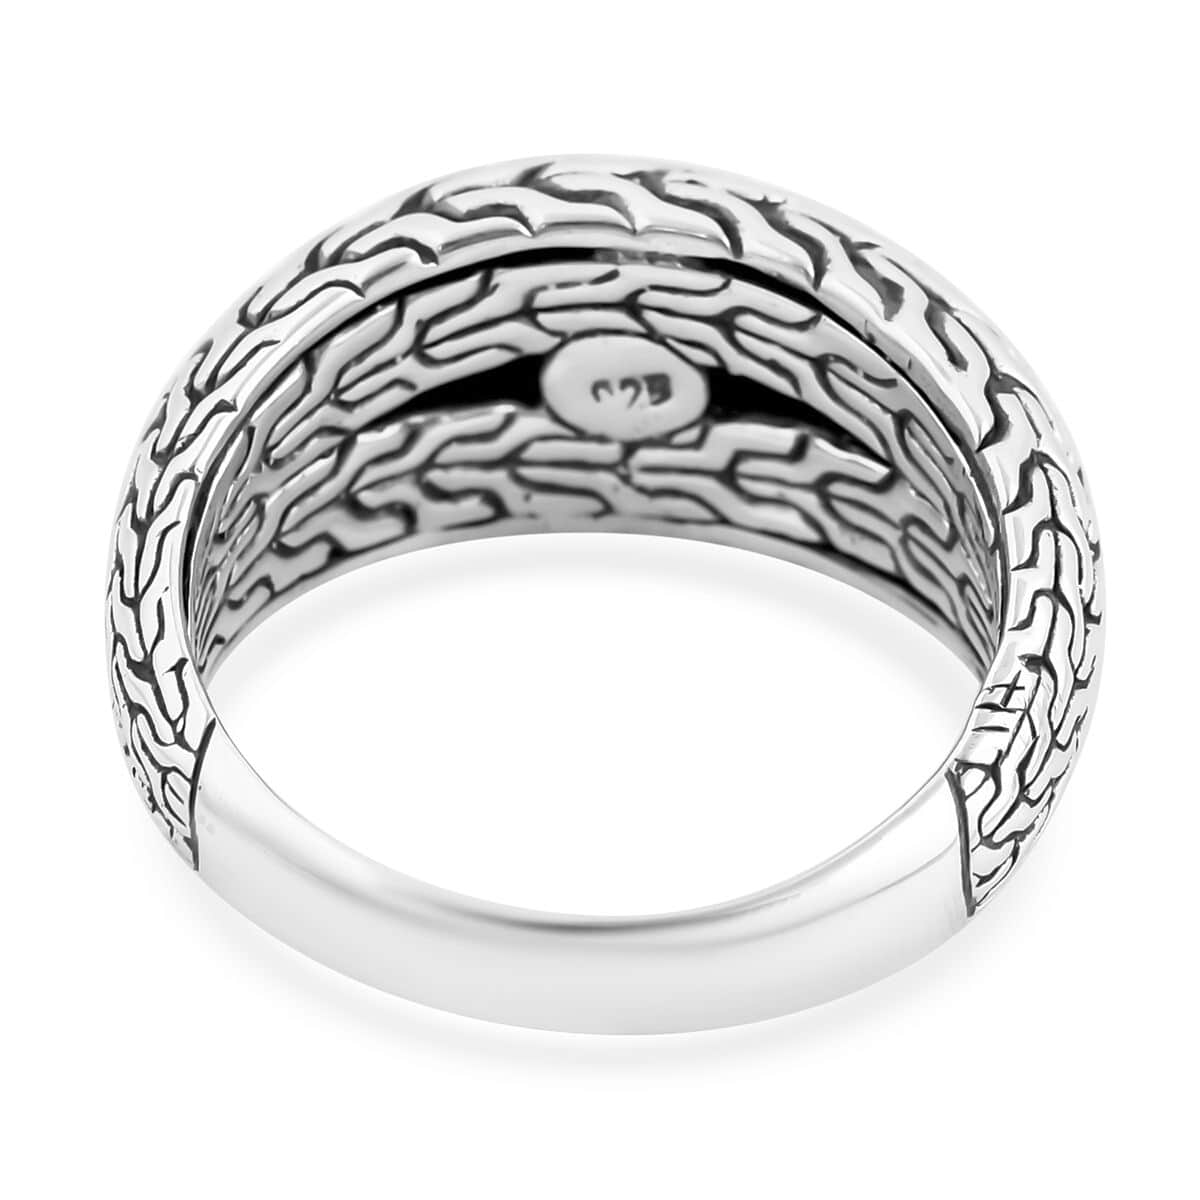 Bali Legacy Tulang Naga Texture Ring (Size 7) and Earrings in Sterling Silver 22.40 Grams image number 3